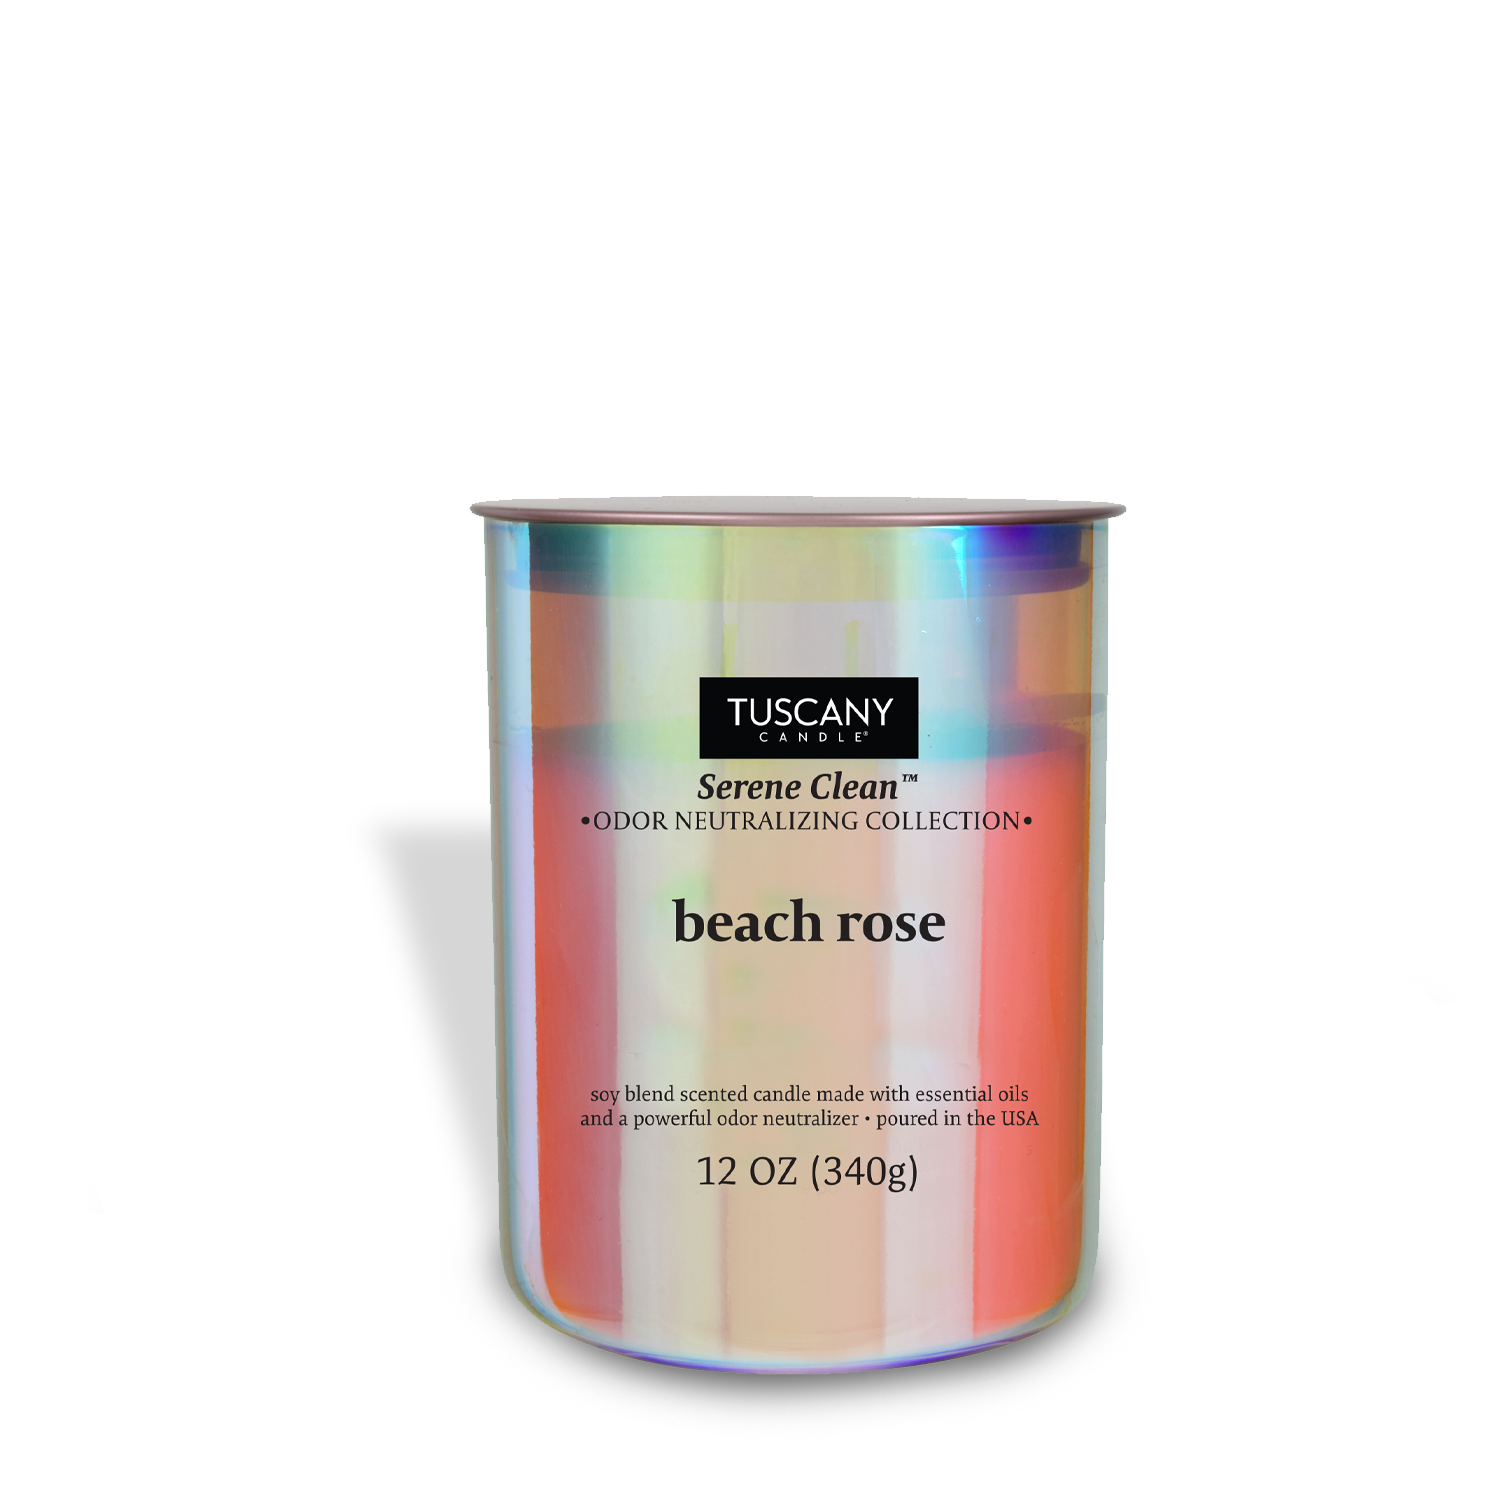 A Beach Rose Scented Jar Candle (12 oz) from the Serene Clean Collection by Tuscany Candle® EVD on a white background.